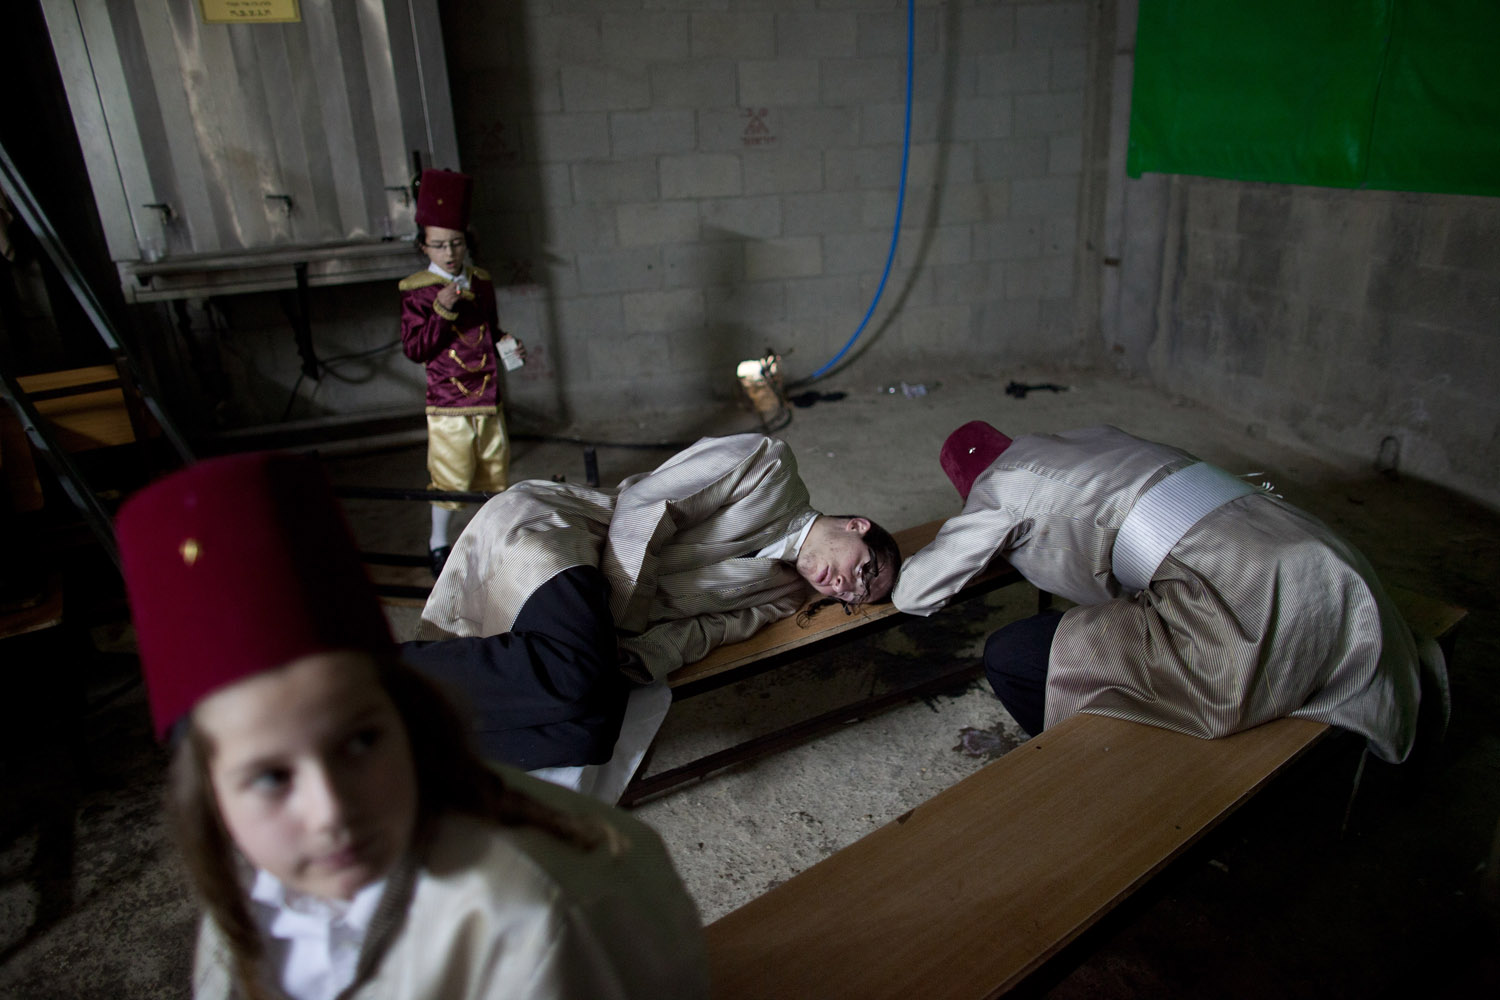 Feb. 24, 2013. Ultra-Orthodox Jews from the Lelov Hasidic sect rest as they celebrate the Jewish festival of Purim.